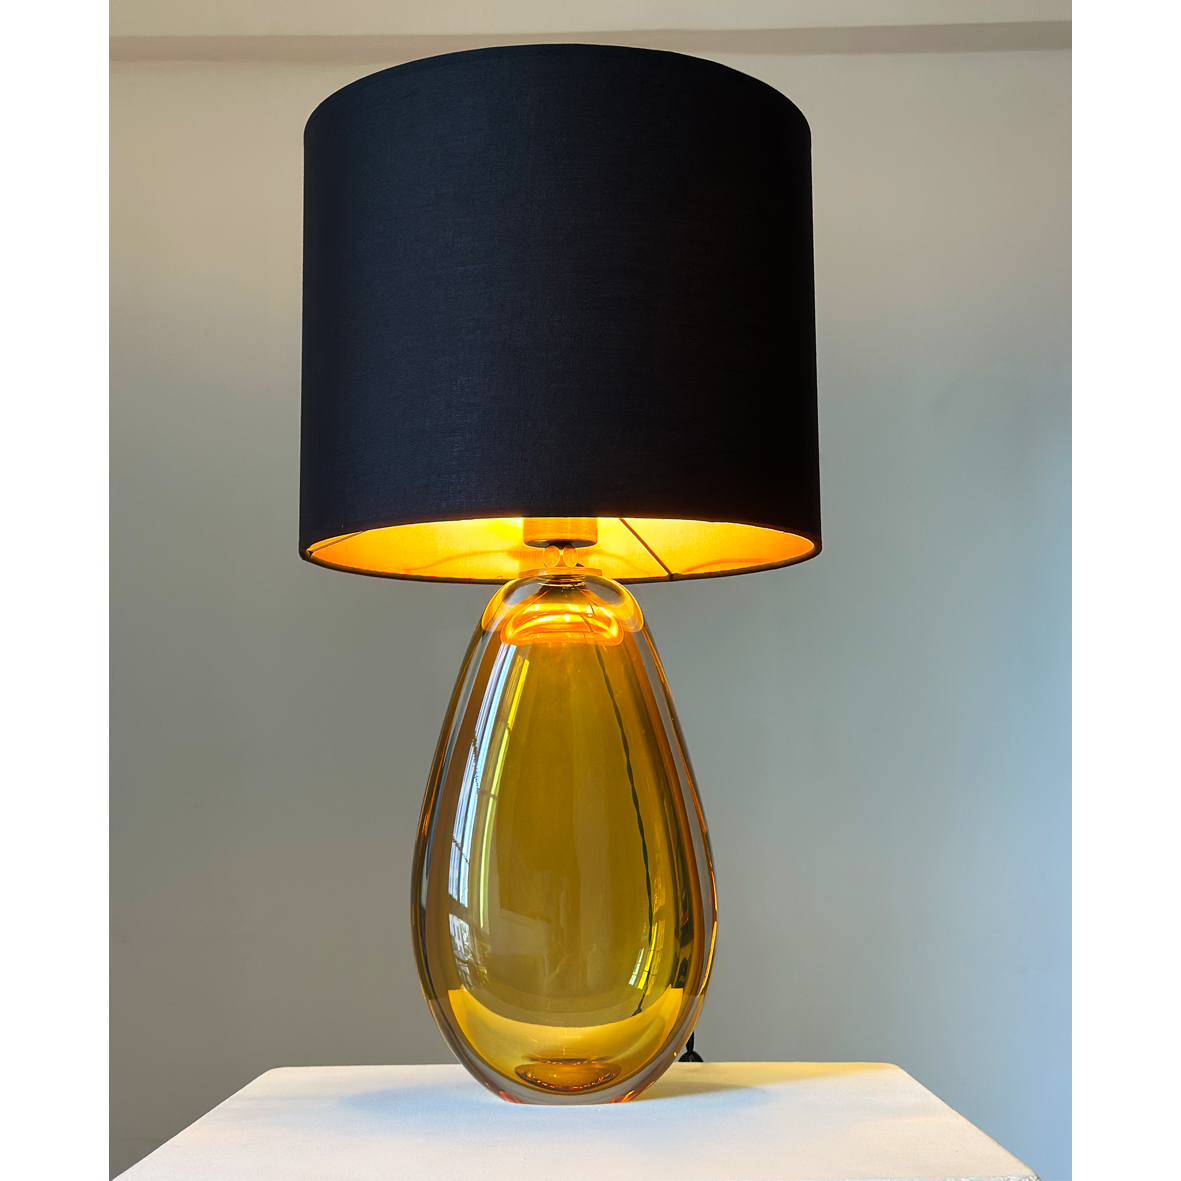 Picture of Harmony Honey Table Lamp